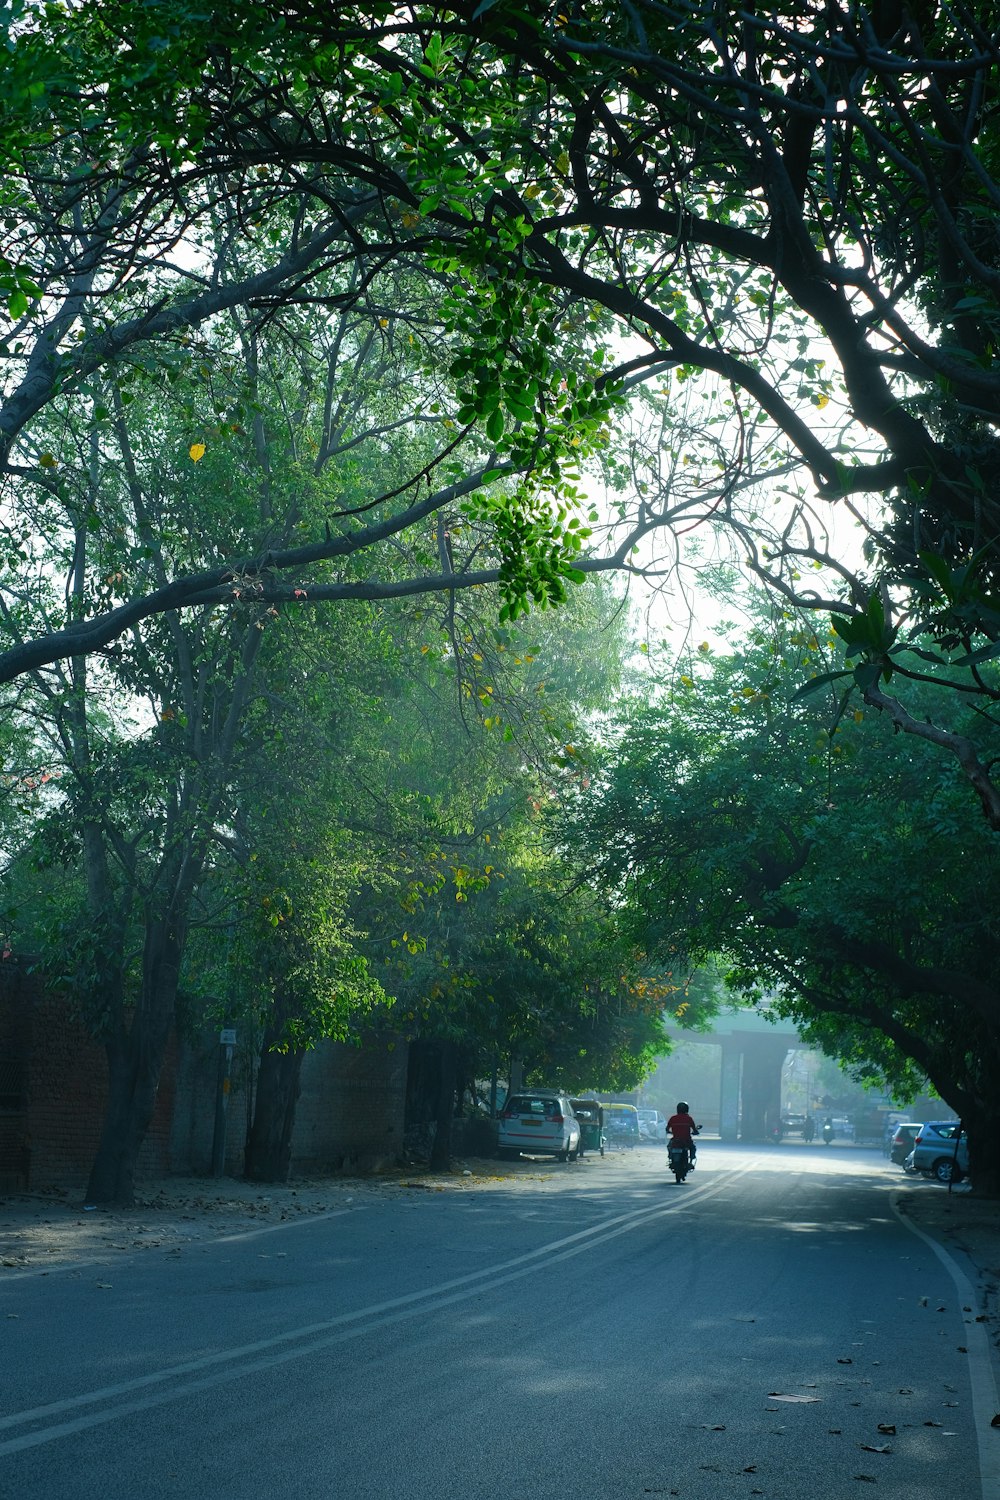 a person riding a bicycle on a road with trees on either side